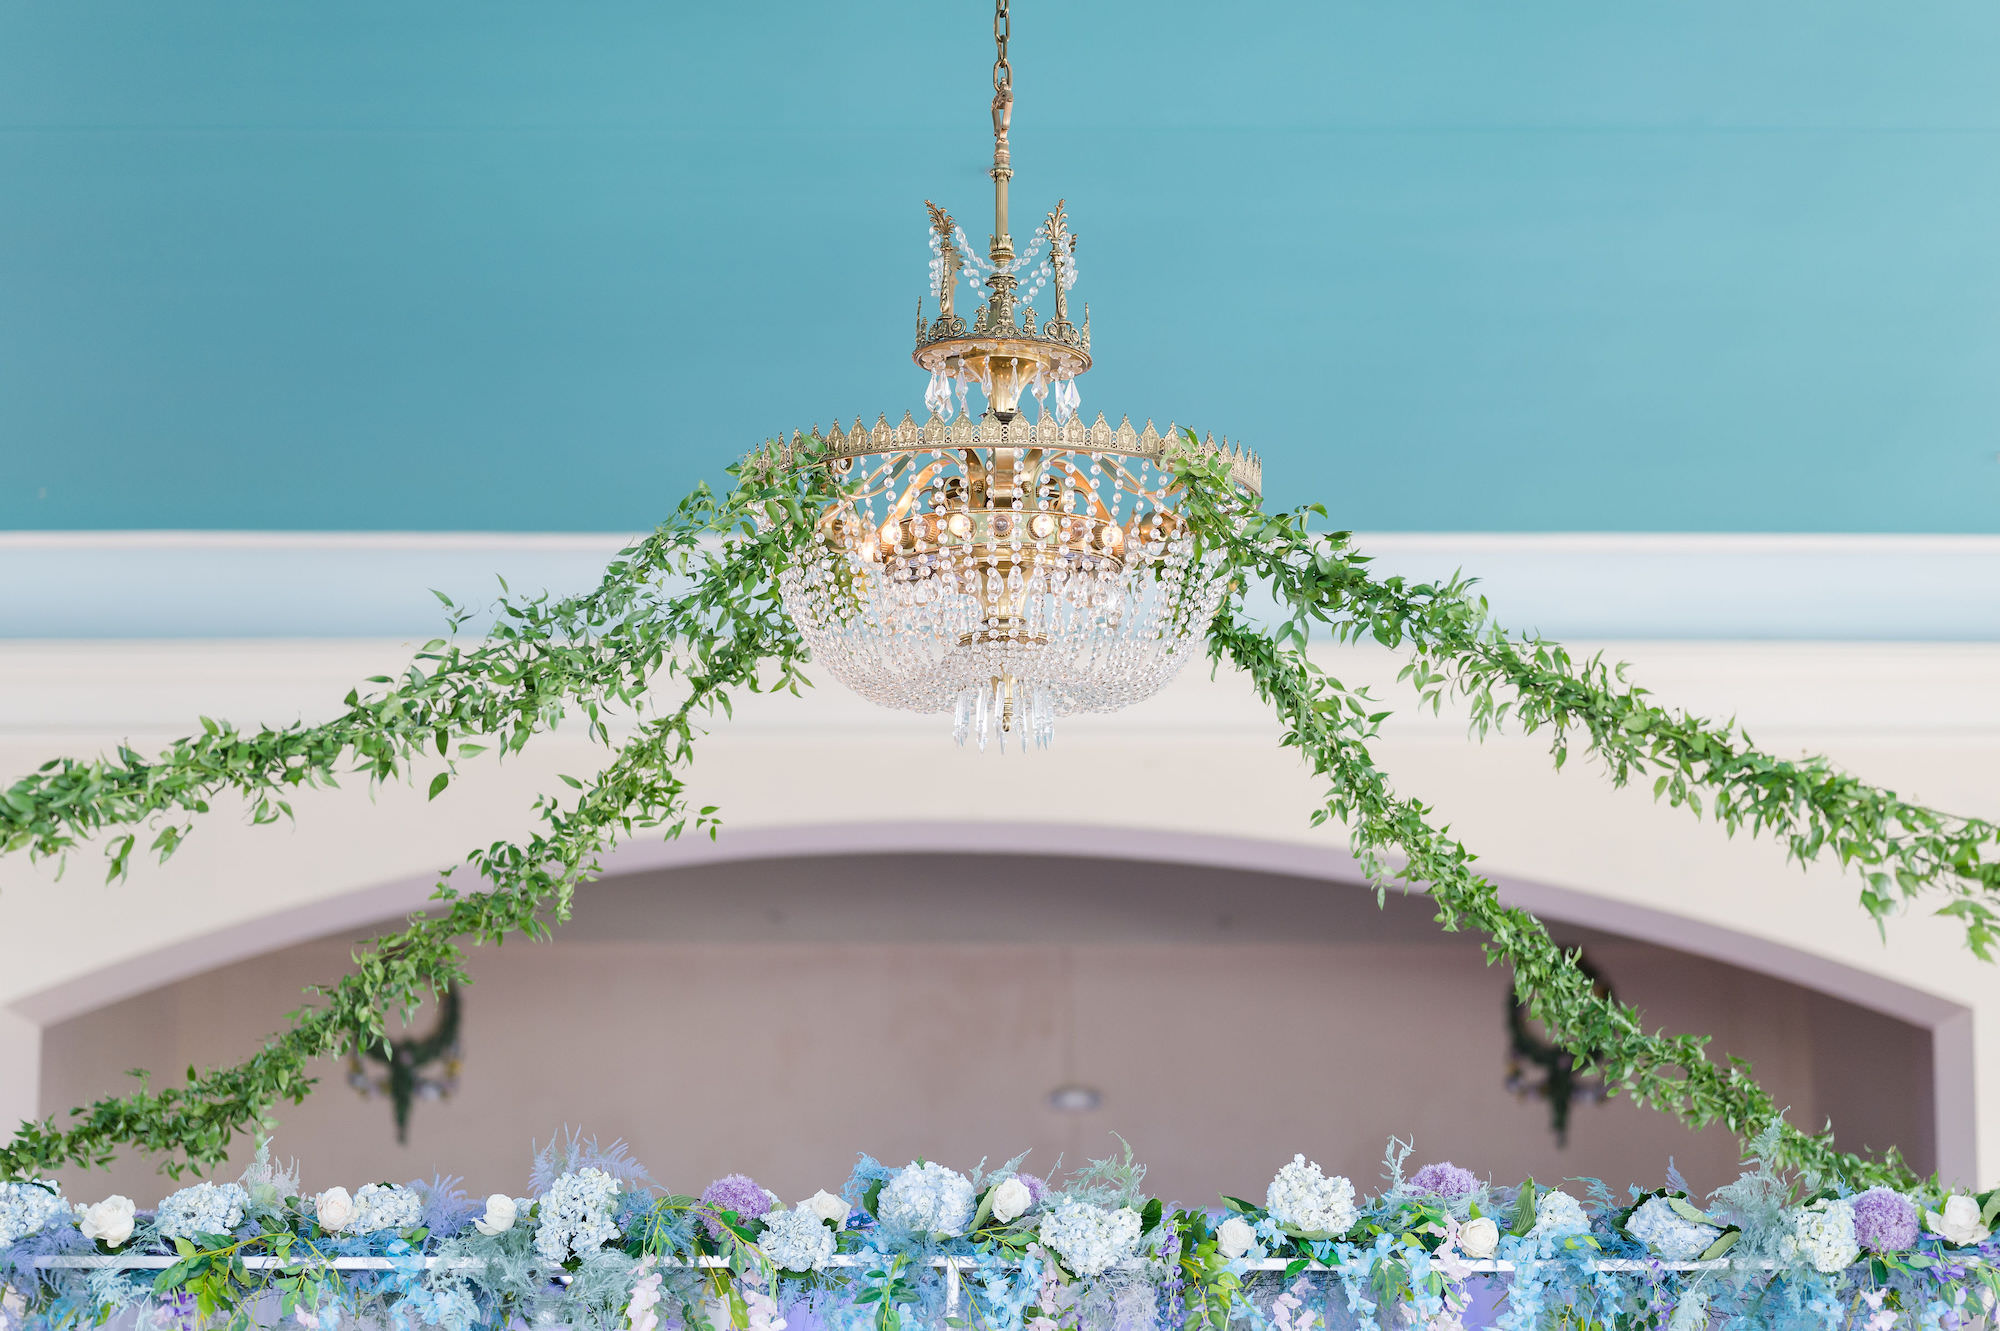 Greenery Chandelier Garland | Whimsical Wedding Reception Decor Inspiration | Tampa Florist Save the Date Florida